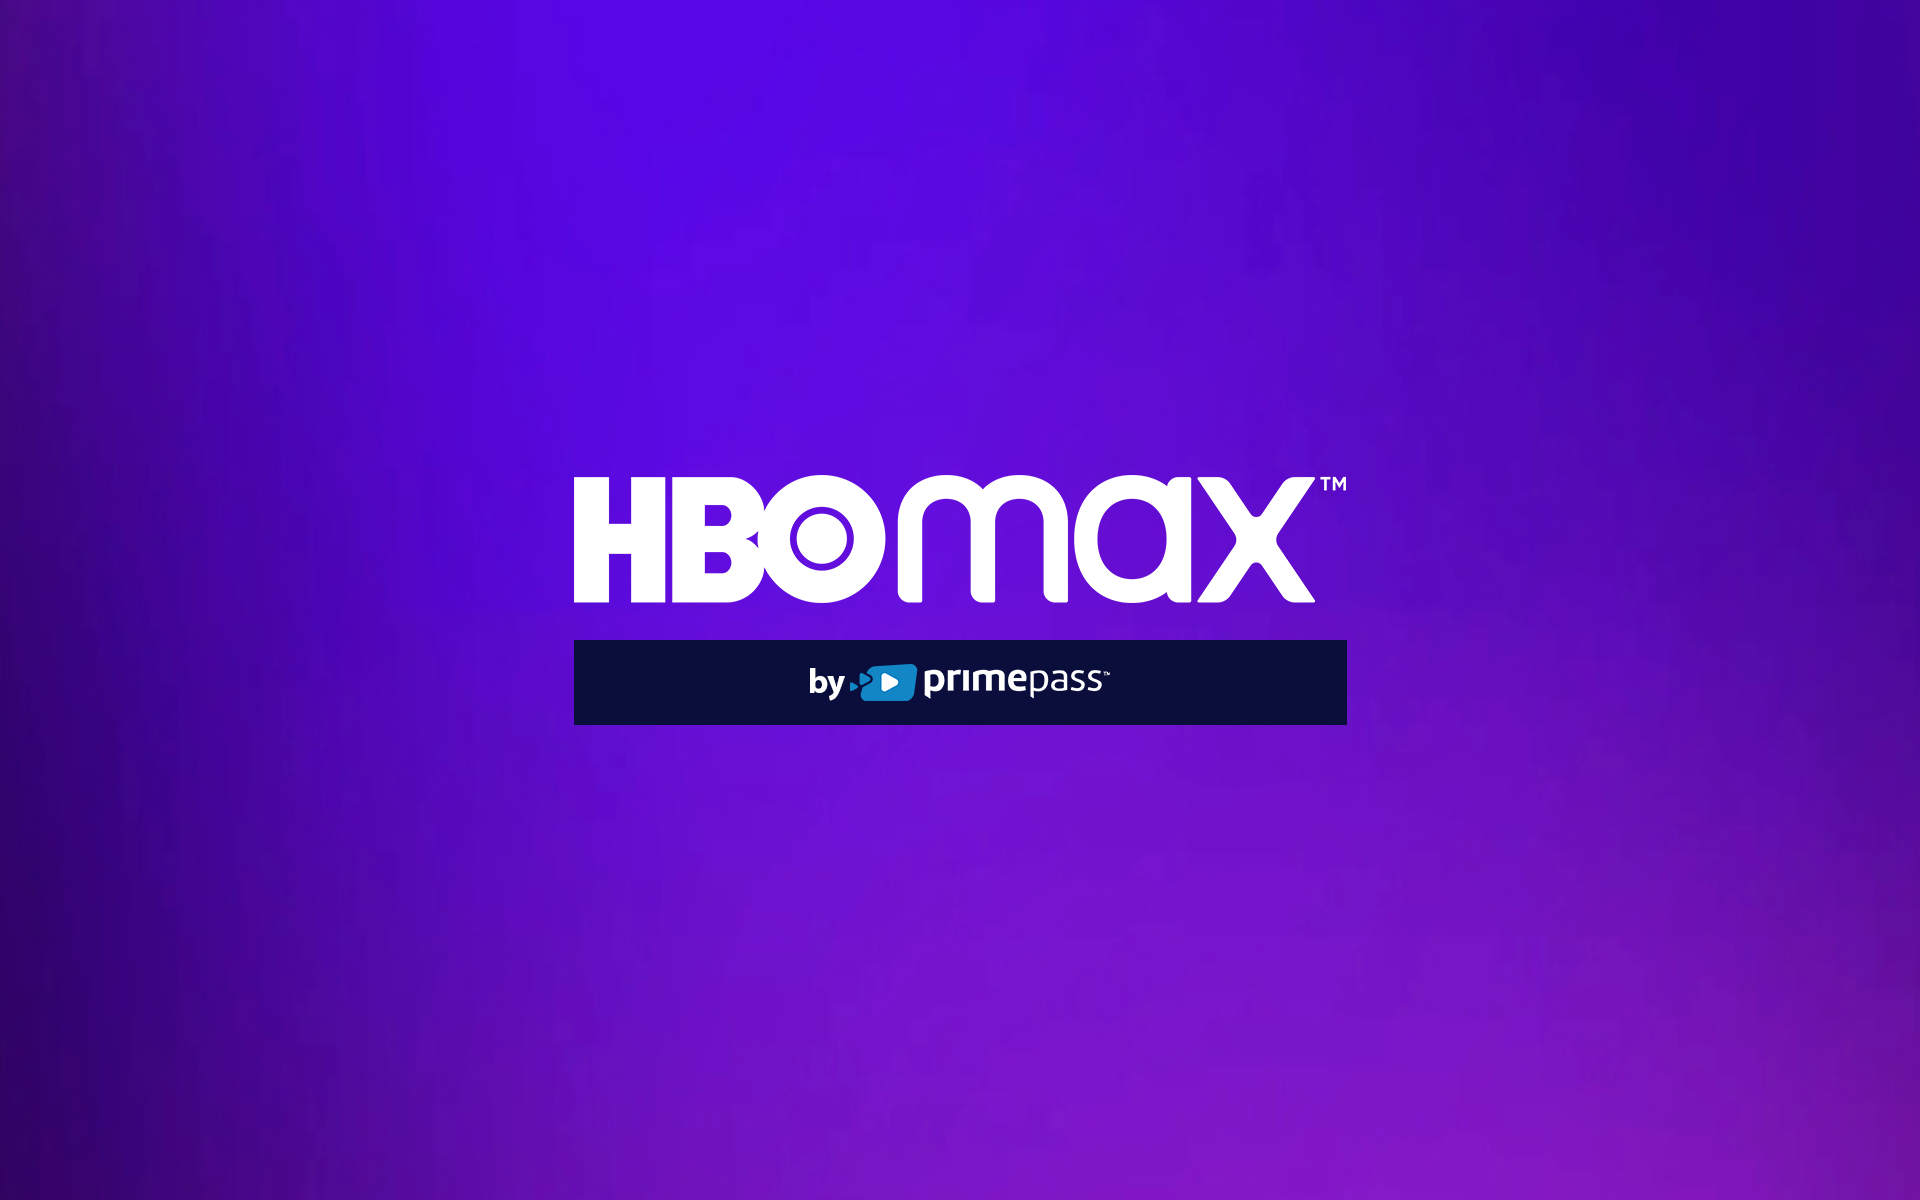 HBO Max by Primepass